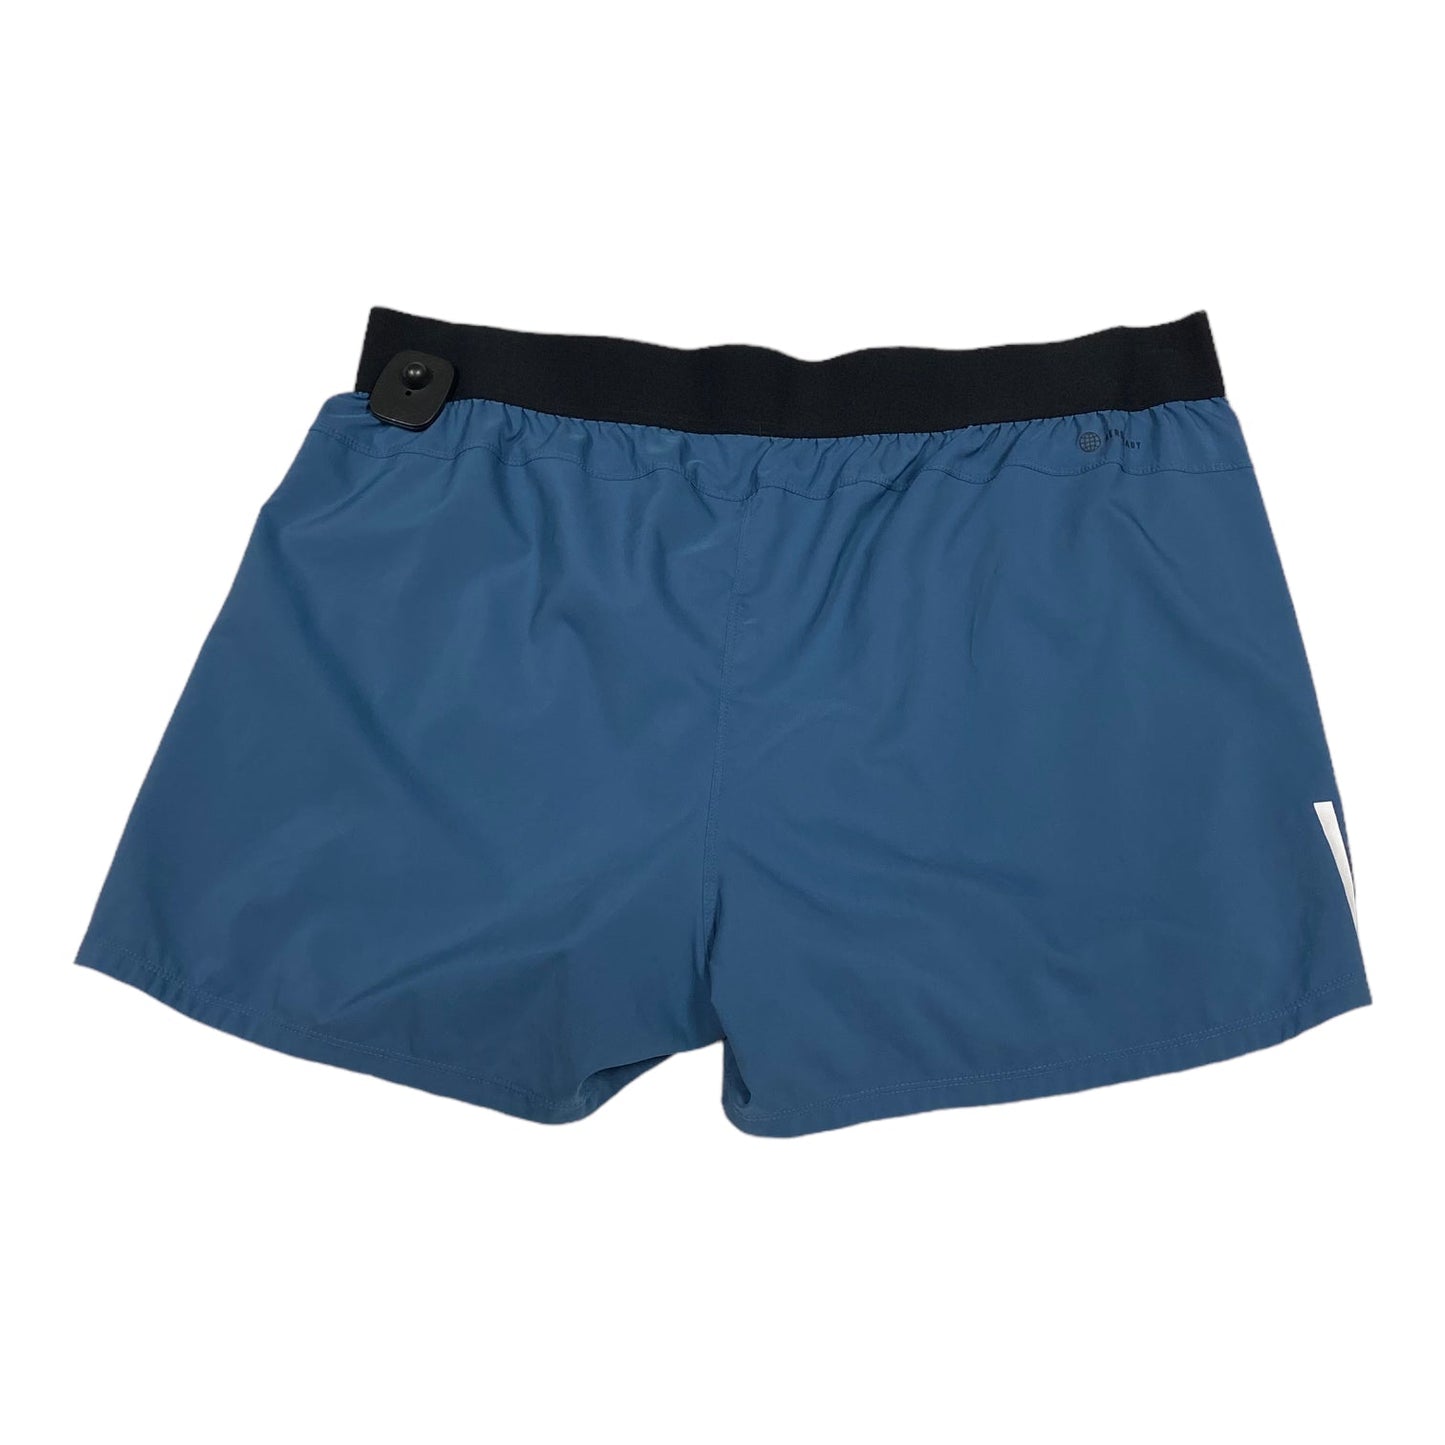 Athletic Shorts By Adidas  Size: 2x